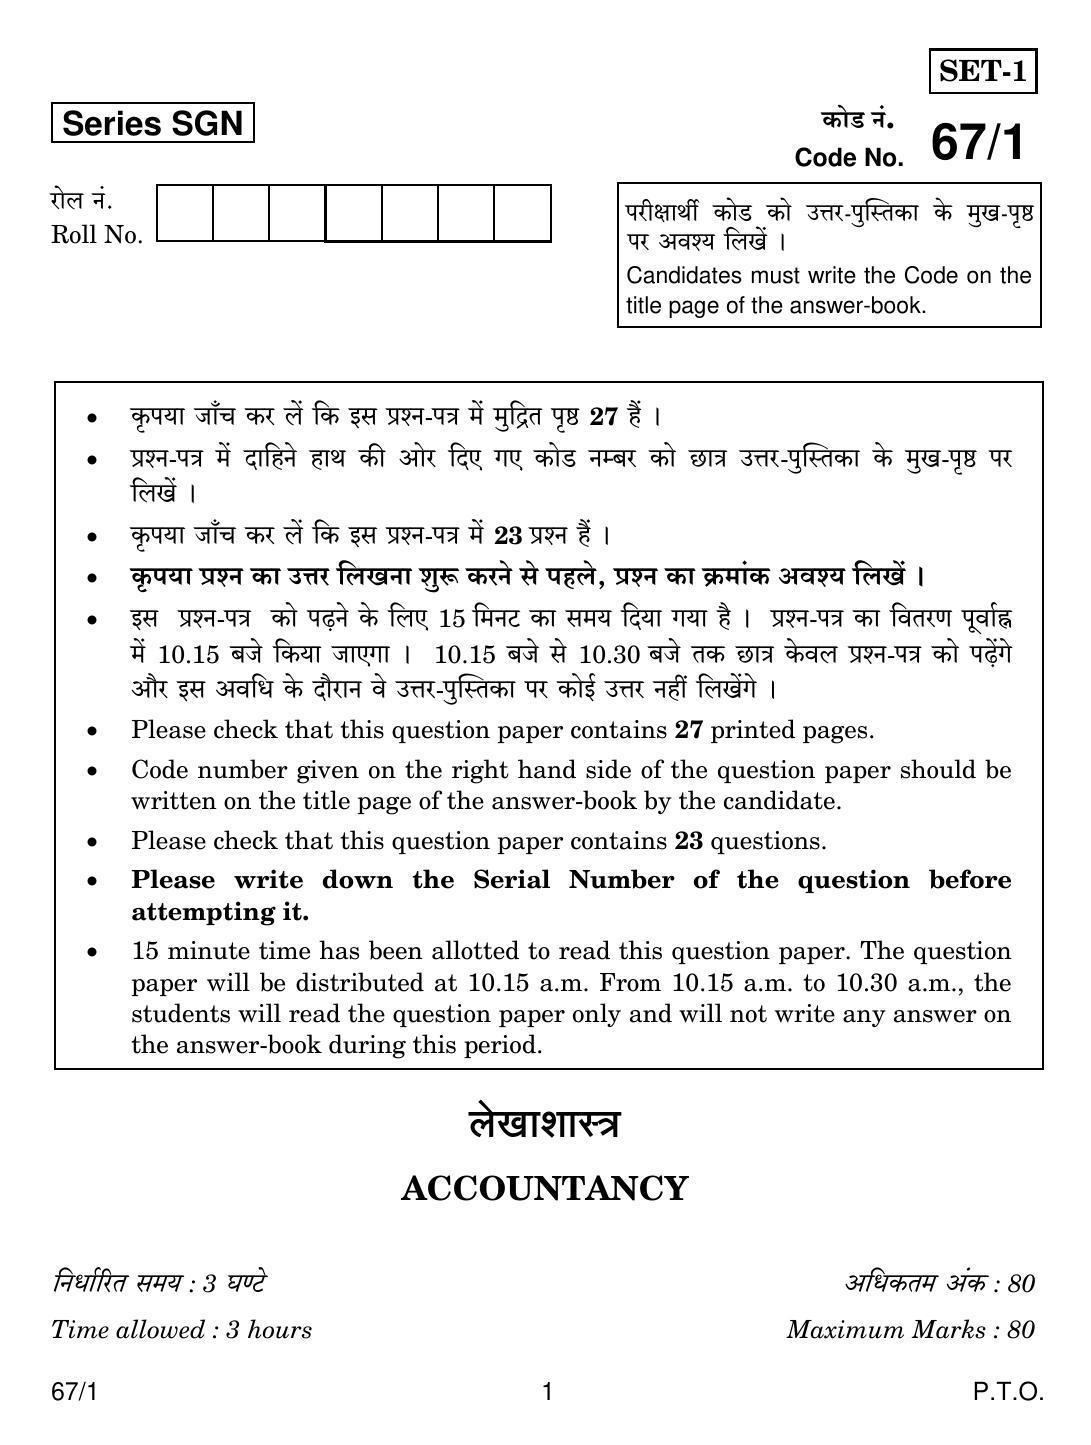 CBSE Class 12 67-1 ACCOUNTANCY 2018 Question Paper - Page 1